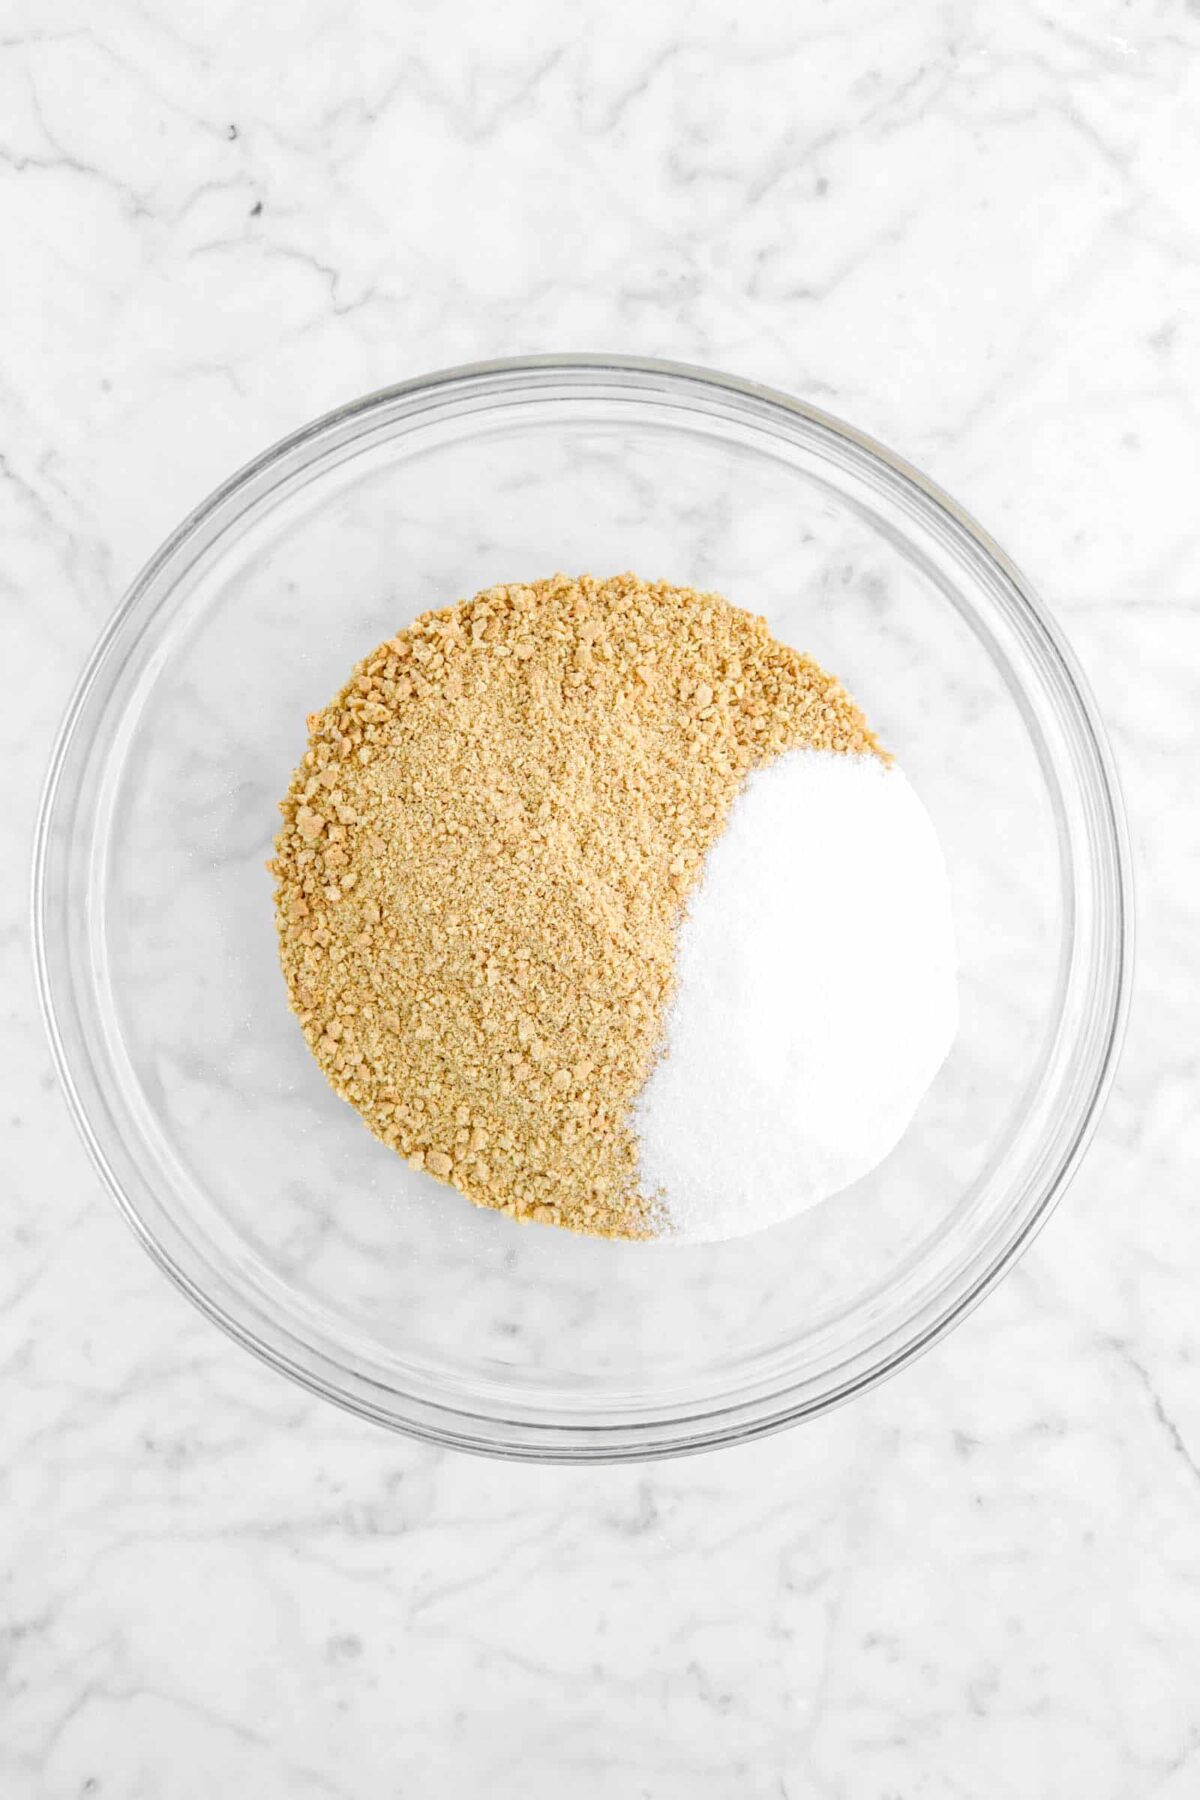 graham cracker crumbs and sugar in glass bowl